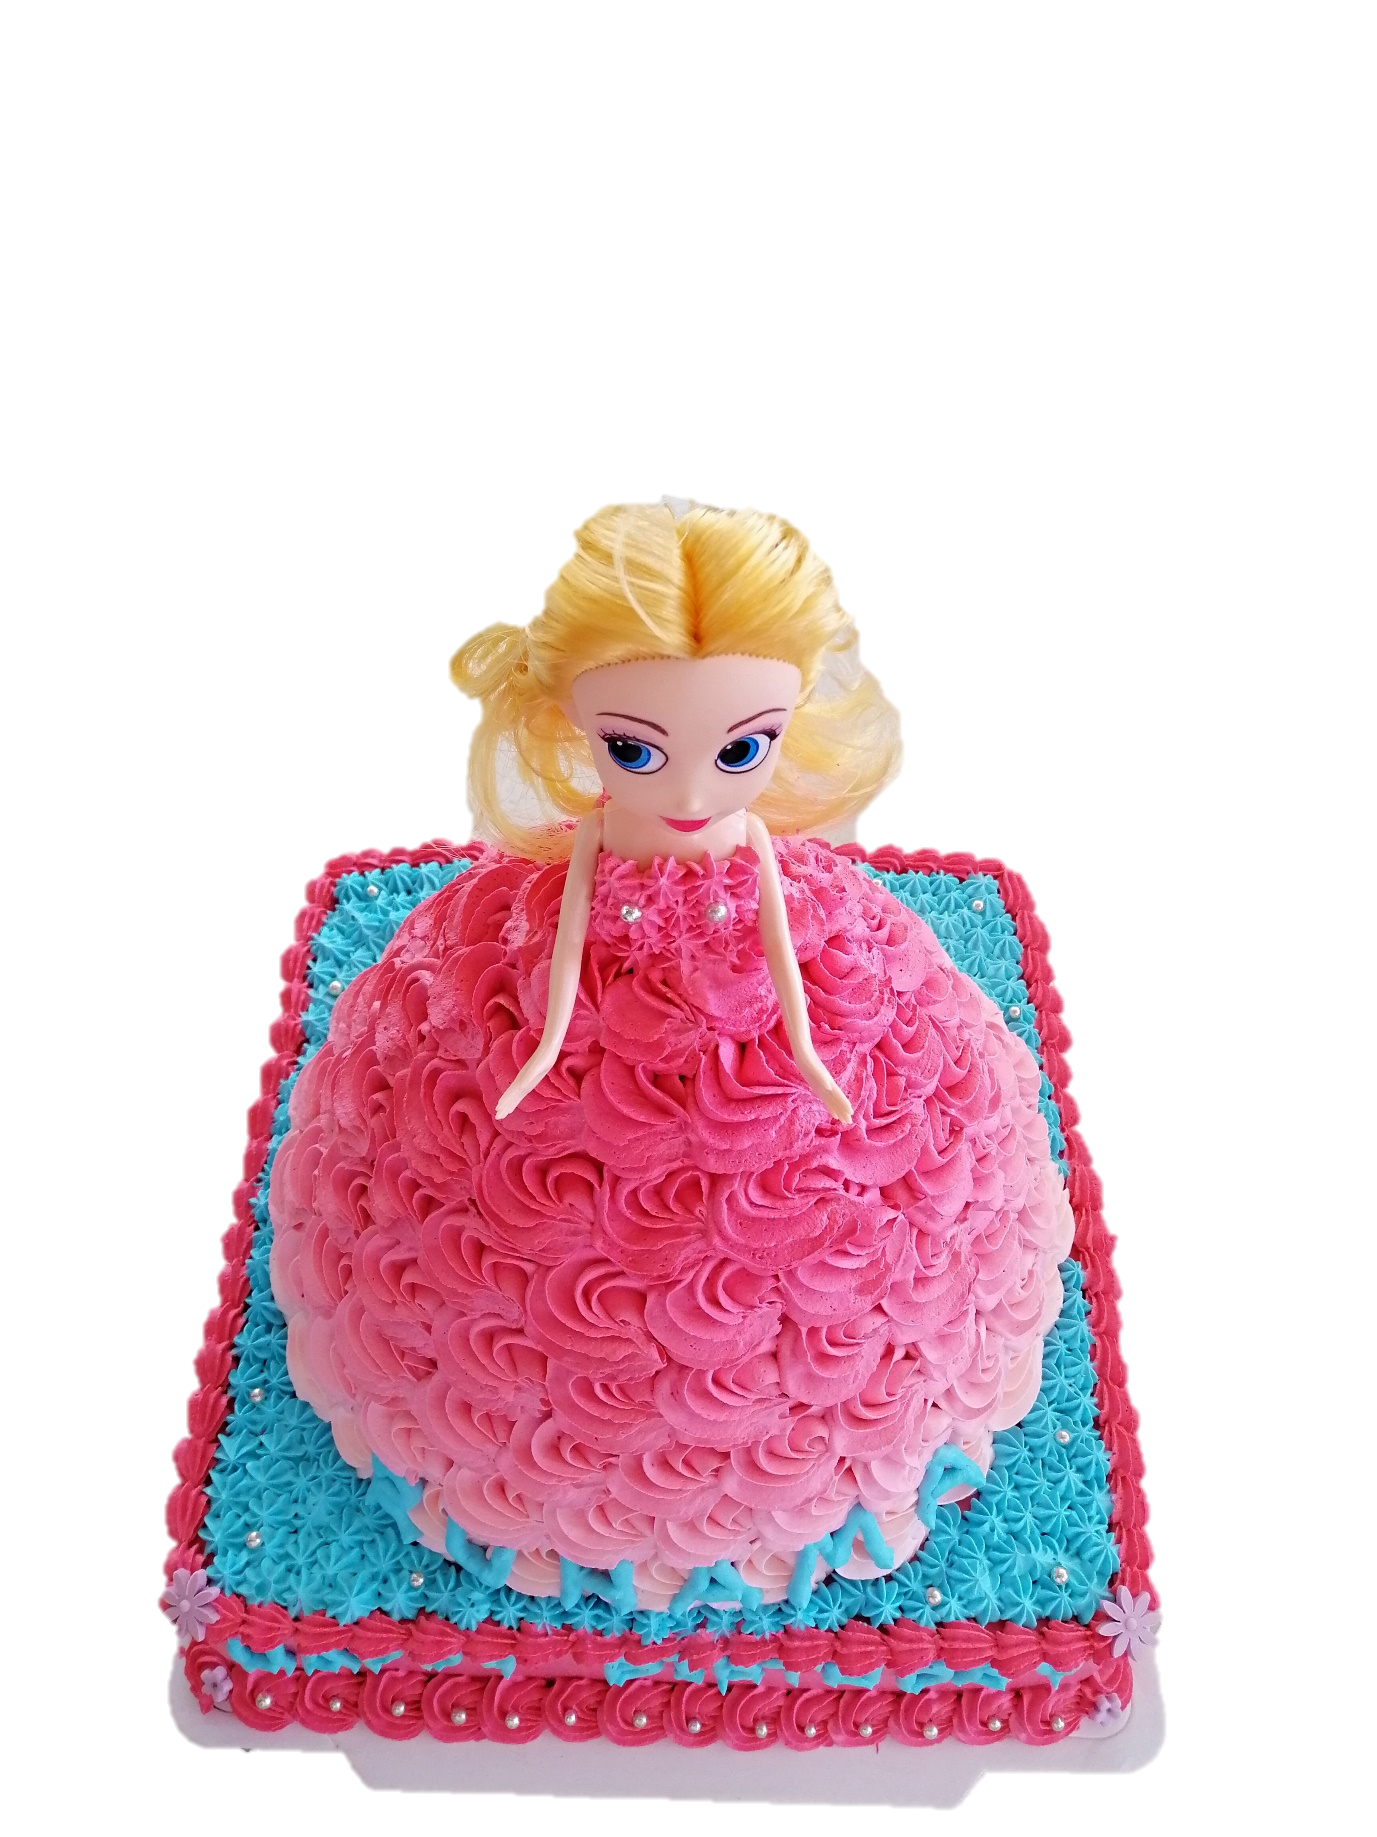 Pink doll cake – License Images – 371548 ❘ StockFood